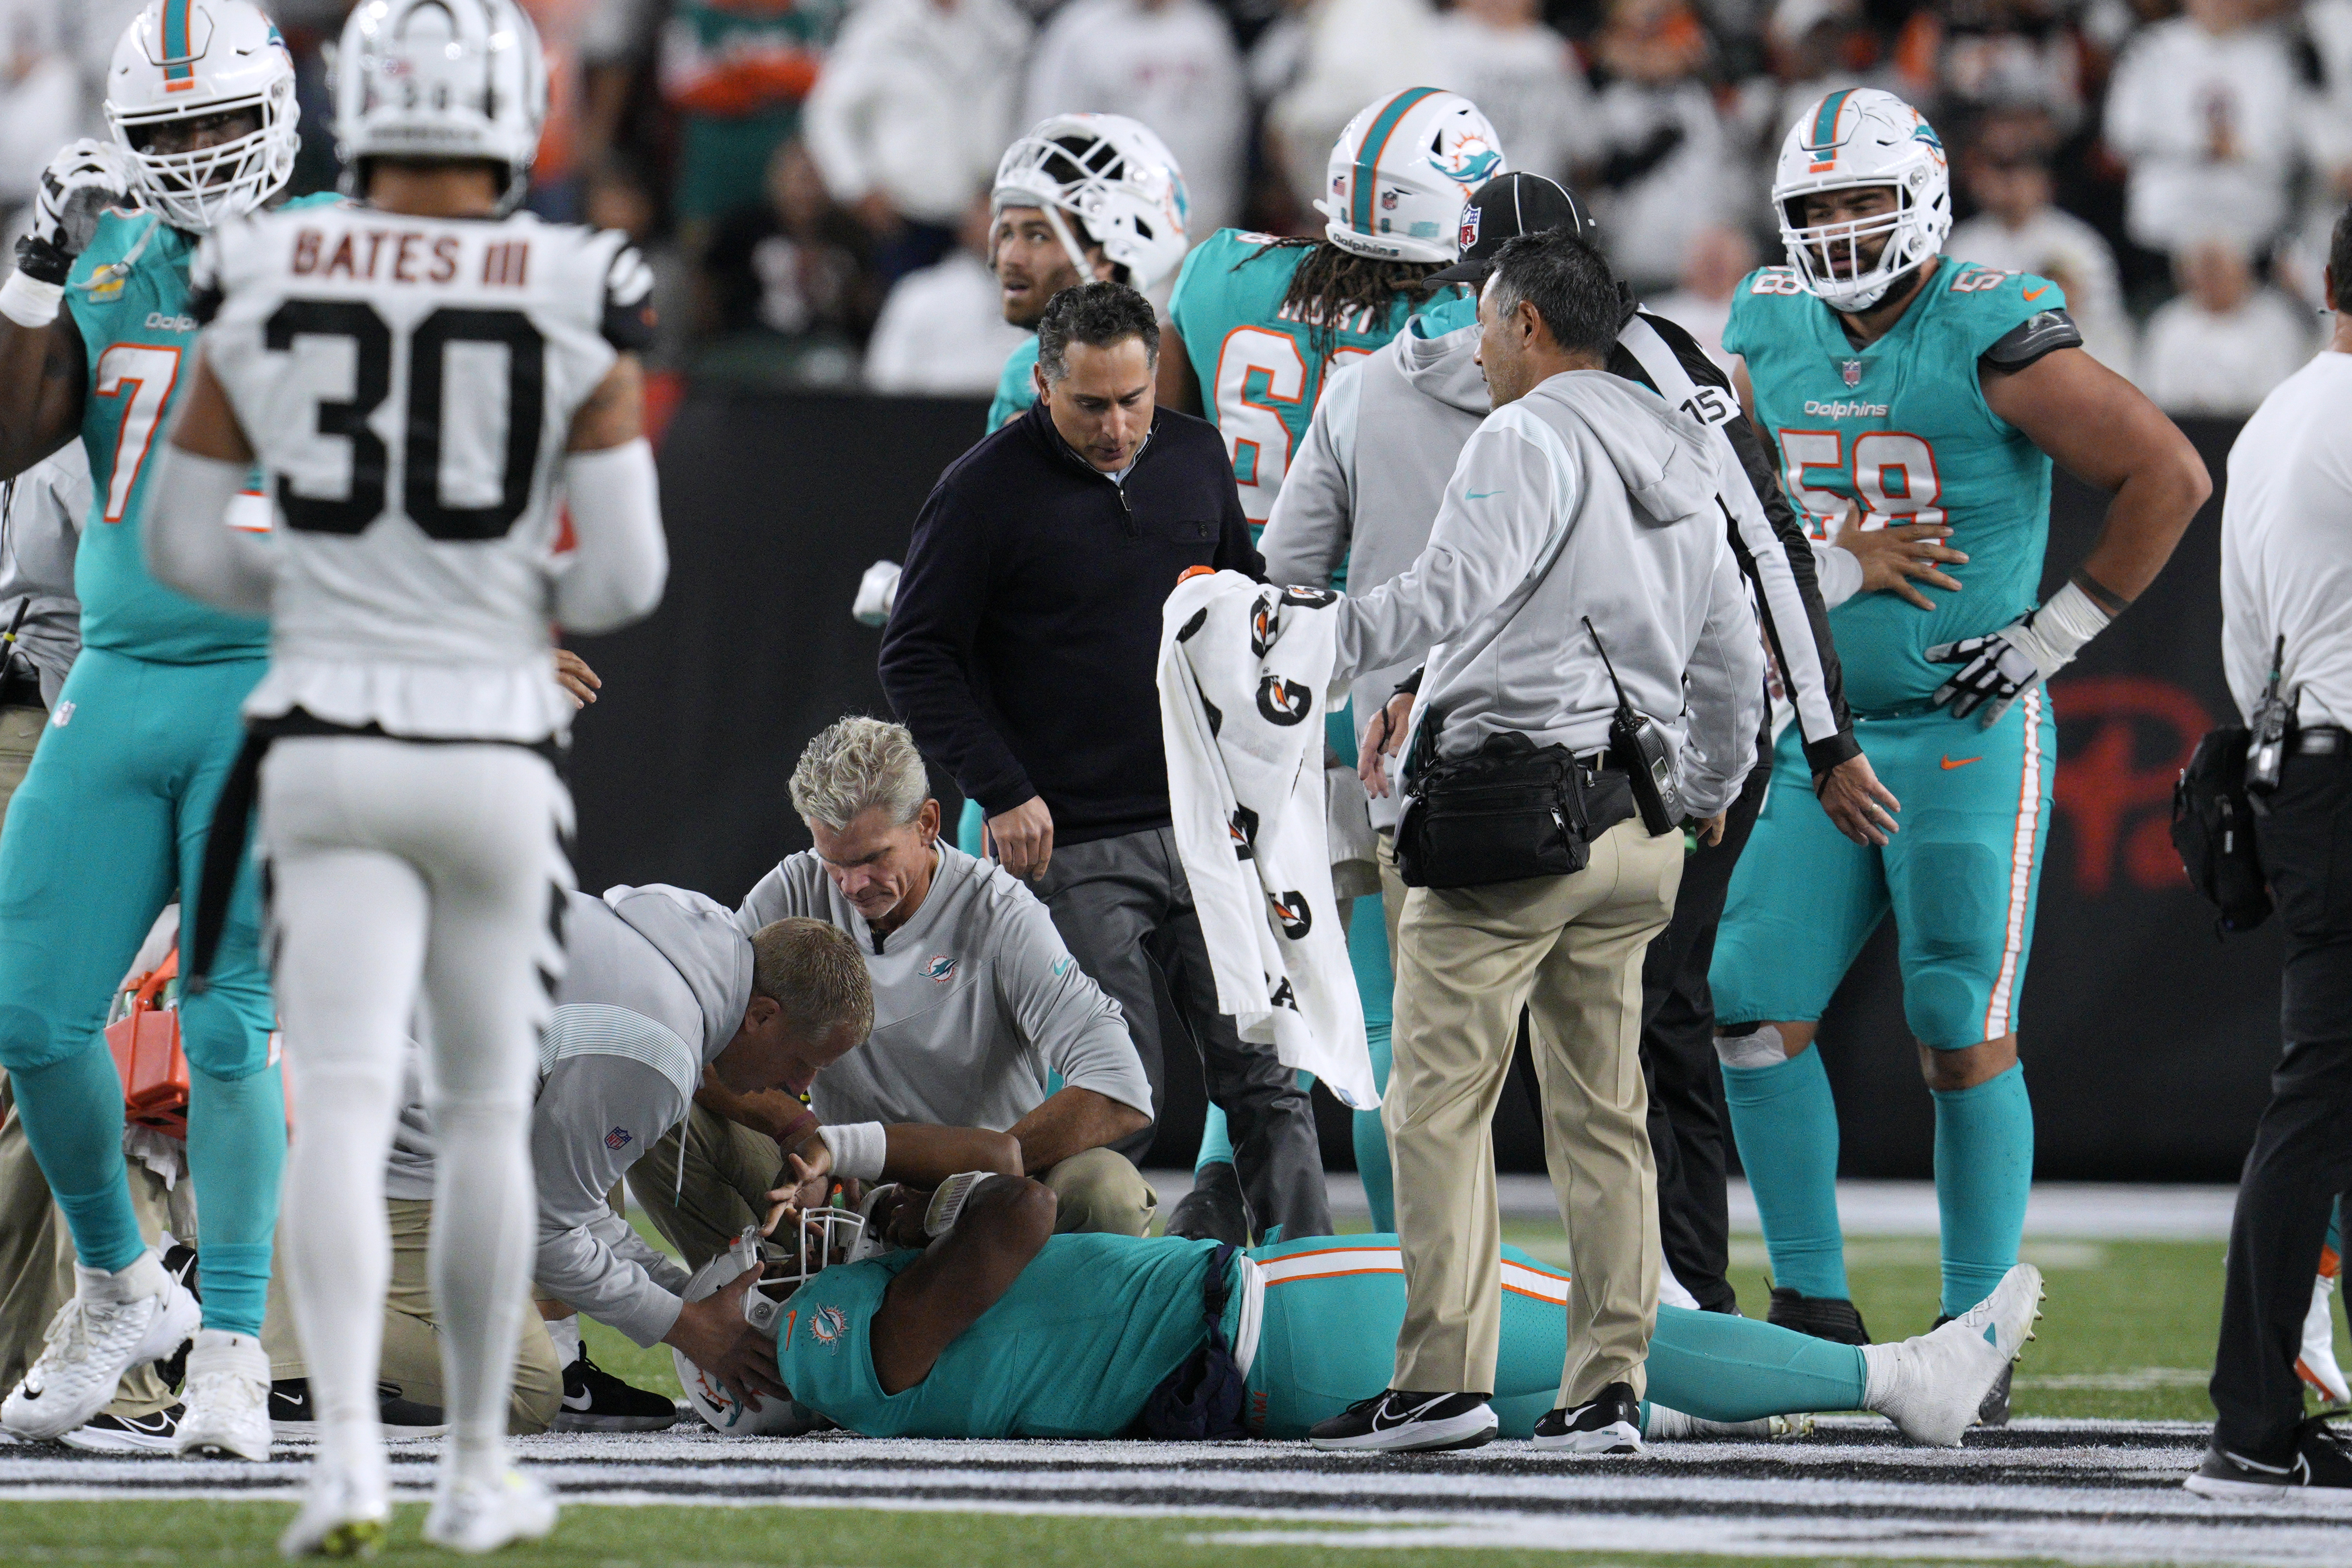 Jets run past Dolphins 40-17, snap 12-game skid vs. AFC East